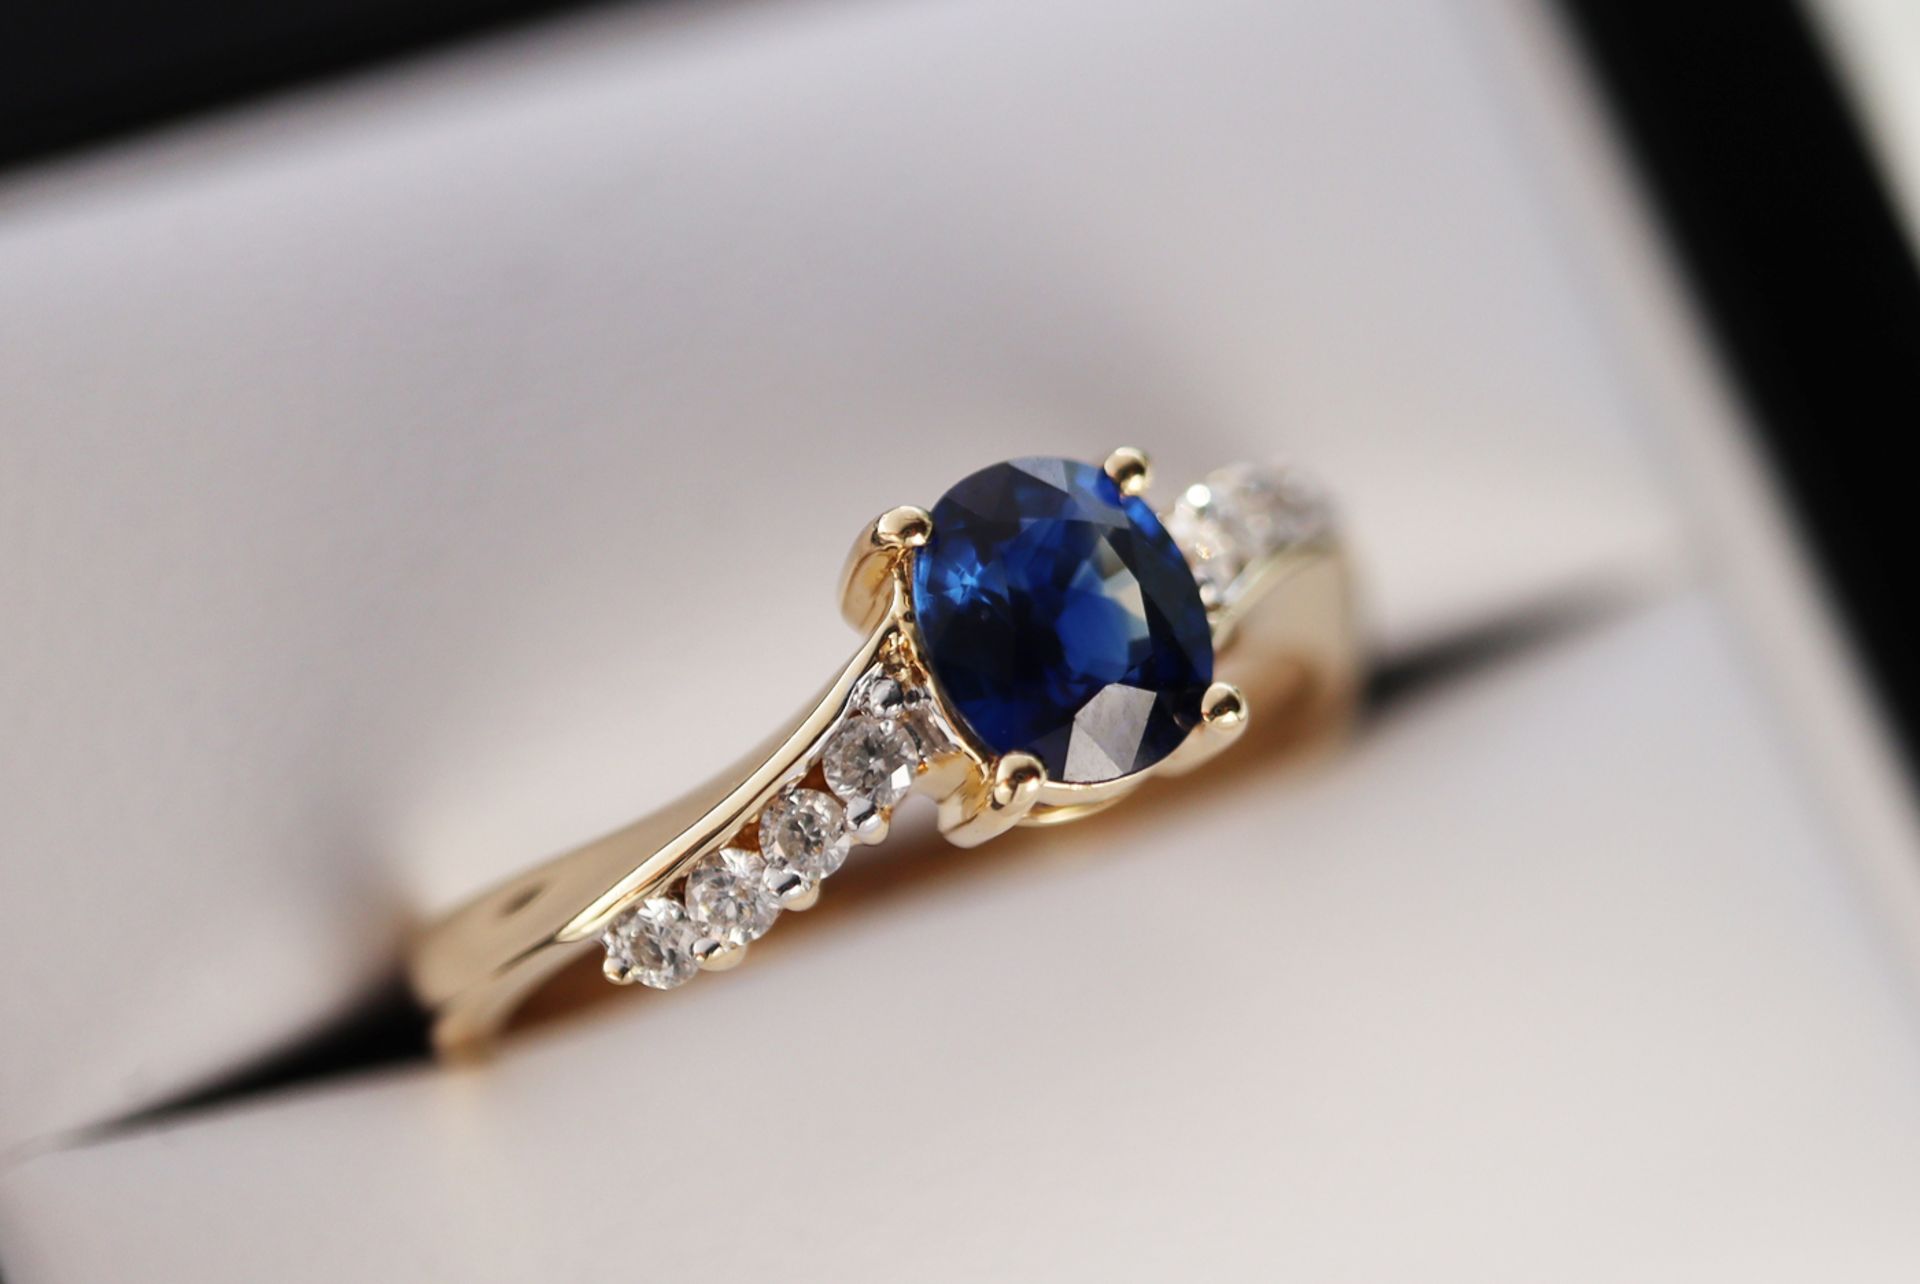 18K GOLD 0.77CT OVAL SAPPHIRE & DIAMOND RING - Image 8 of 8